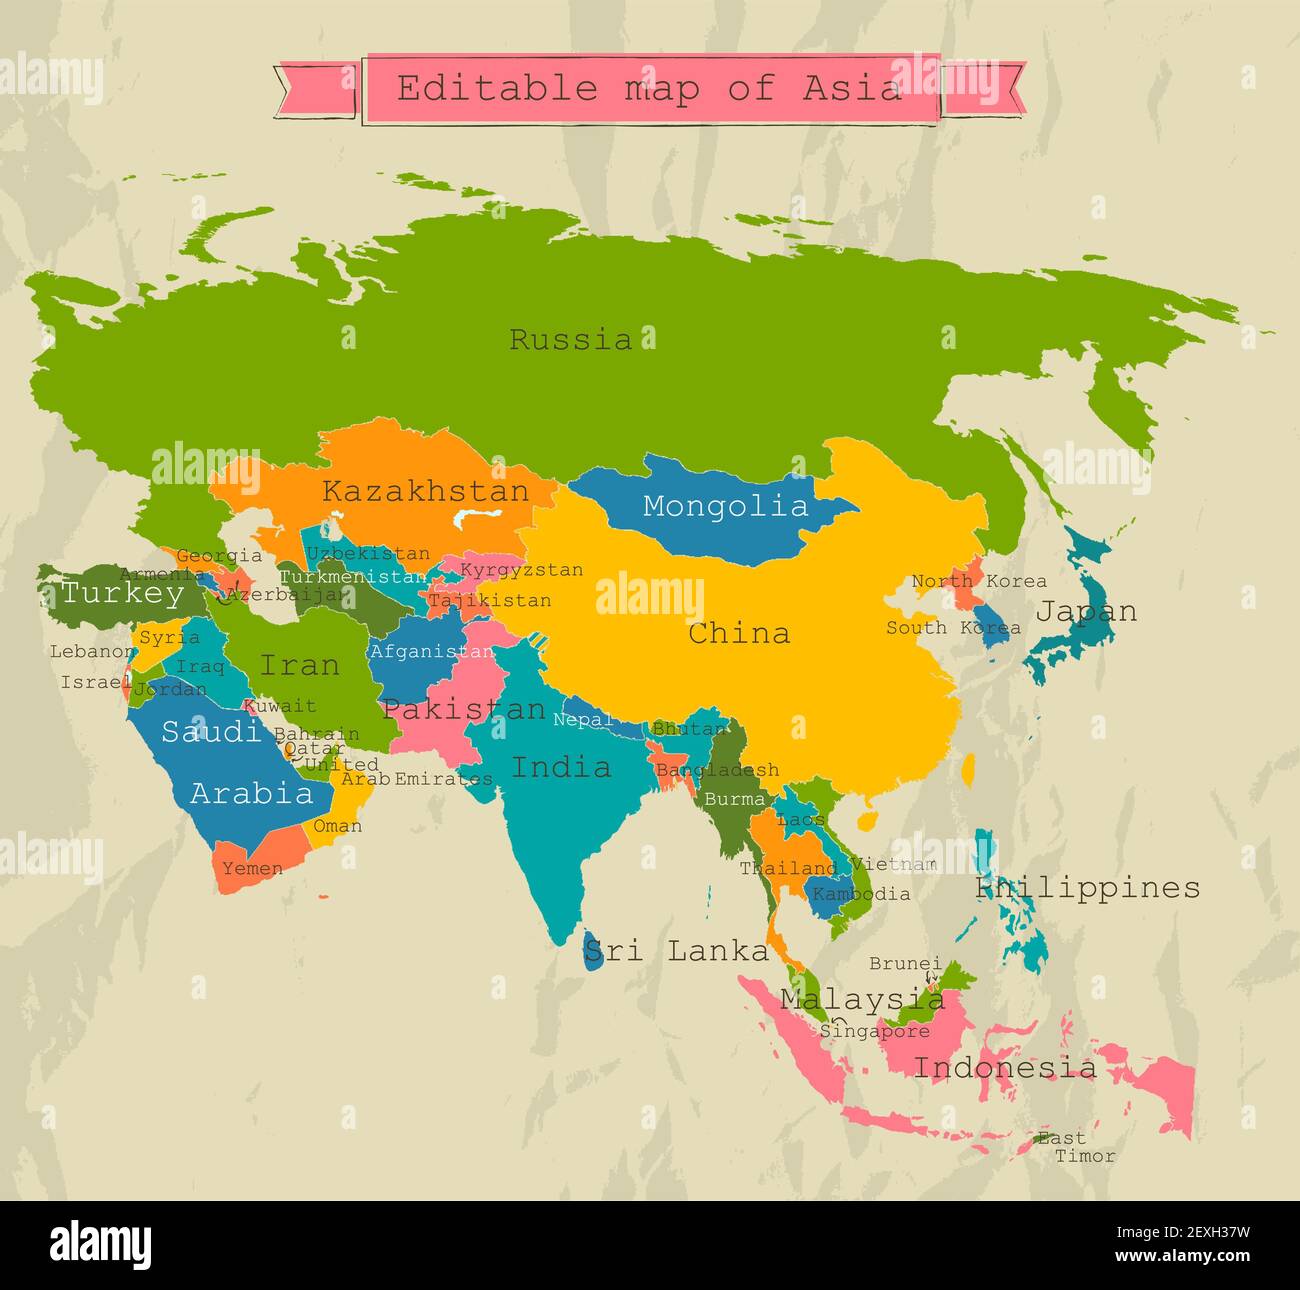 Editable Asia map with all countries. Stock Photo